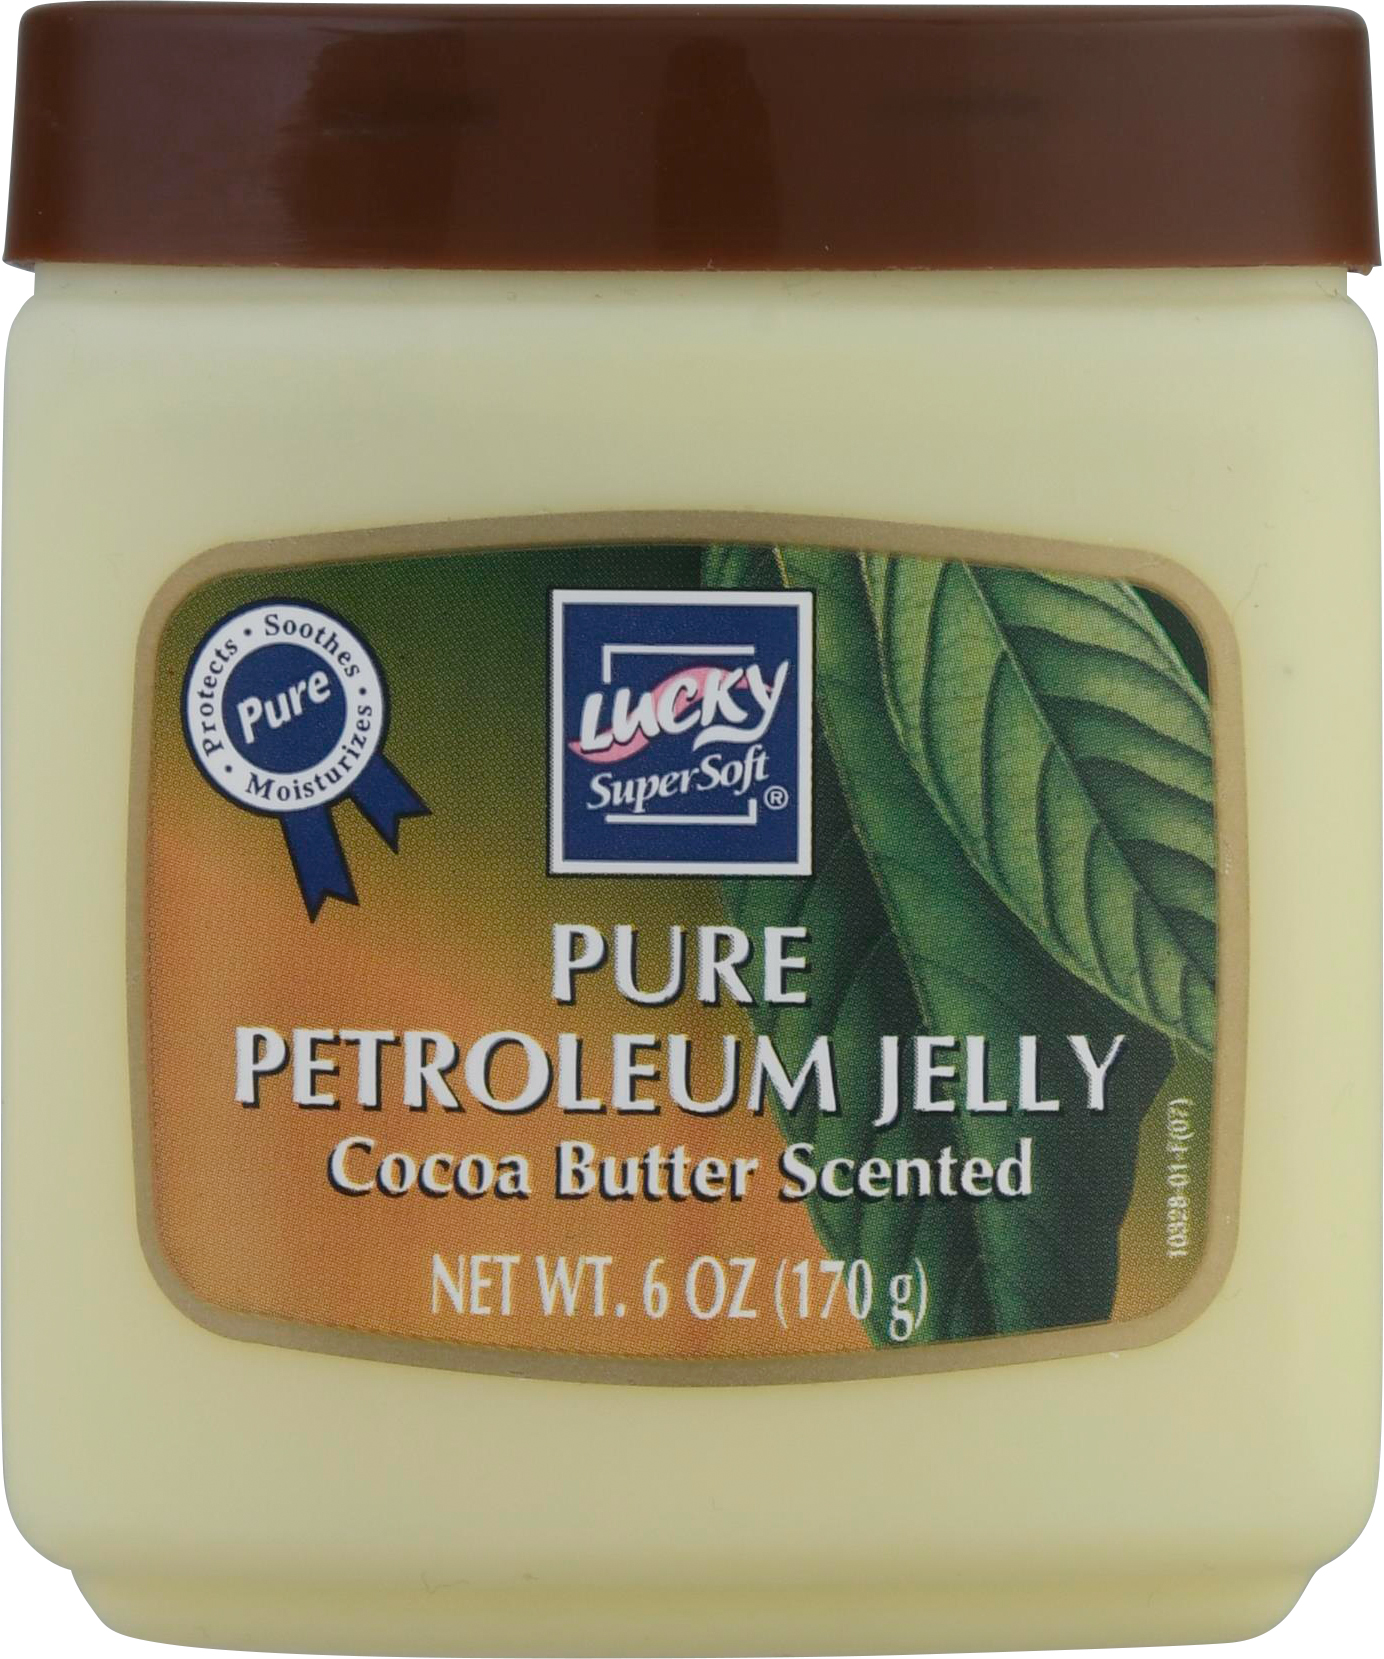 Lucky Super Soft Pure Cocoa Butter Scented Petroleum Jelly 6 oz